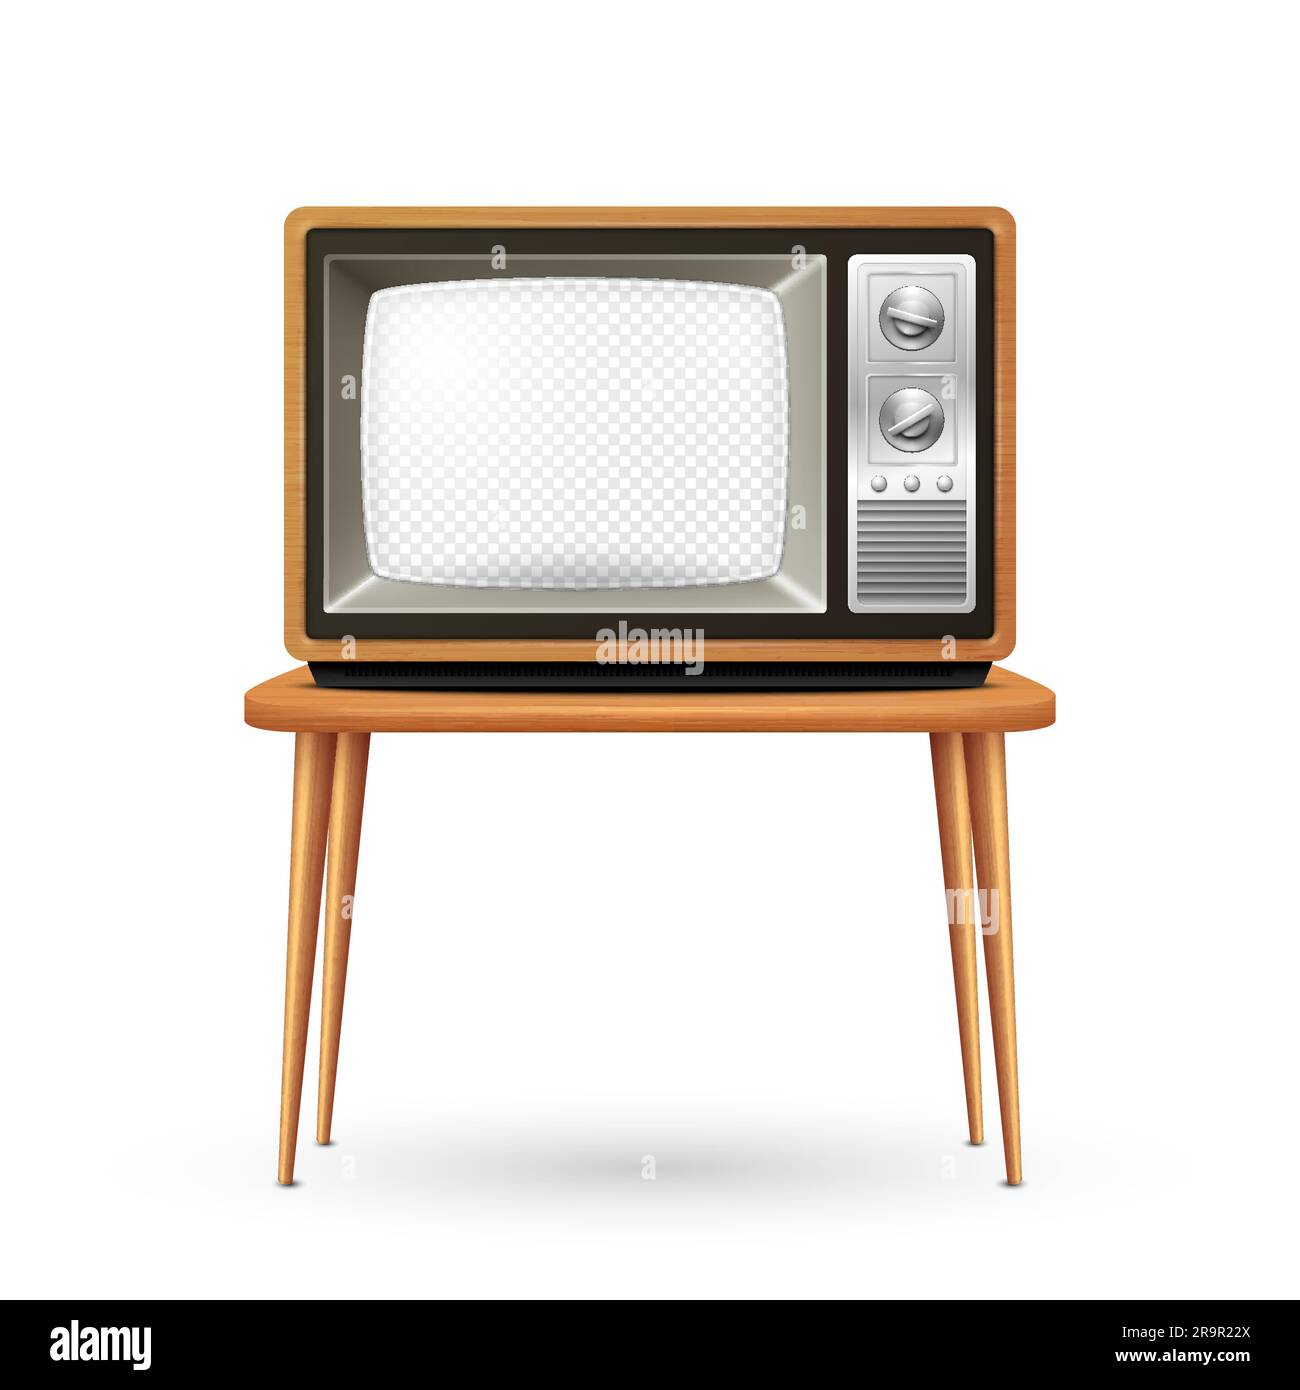 Vector Retro TV Receiver with Wooden Frame and Transparent Screen, Isolated. Home Interior Design Concept. Vintage TV Frame Design Template, Border Stock Vector